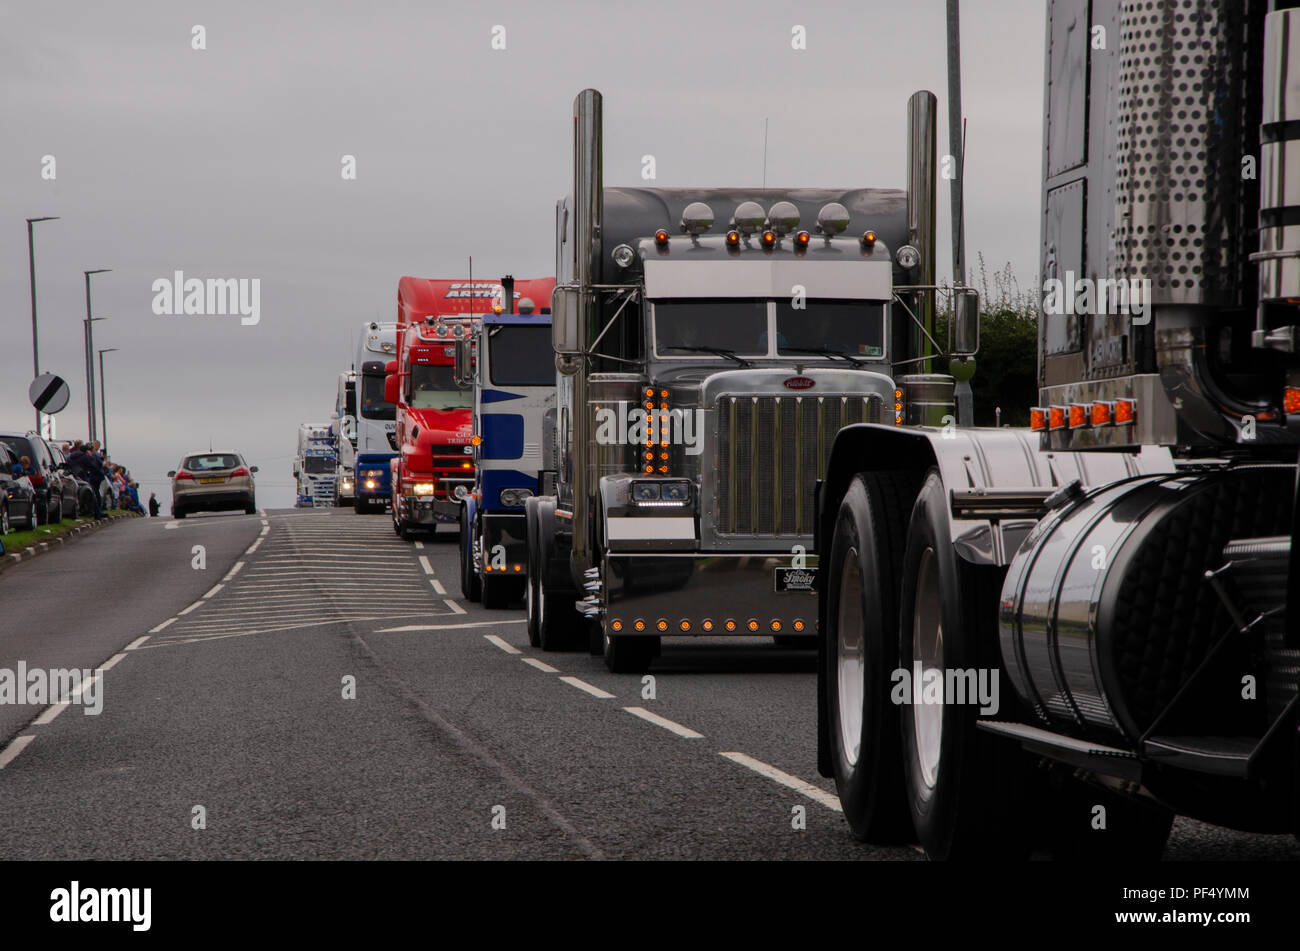 Portstewart, UK. 19 August 2018. This is the final part of the annual NI Truck Fest where some 700+ trucks travel in Convoy along the 9 1/2 mile NW200 course between the towns of Coleraine Portrush and Portstewart in NI. Credit: Brian Wilkinson/Alamy Live News Stock Photo